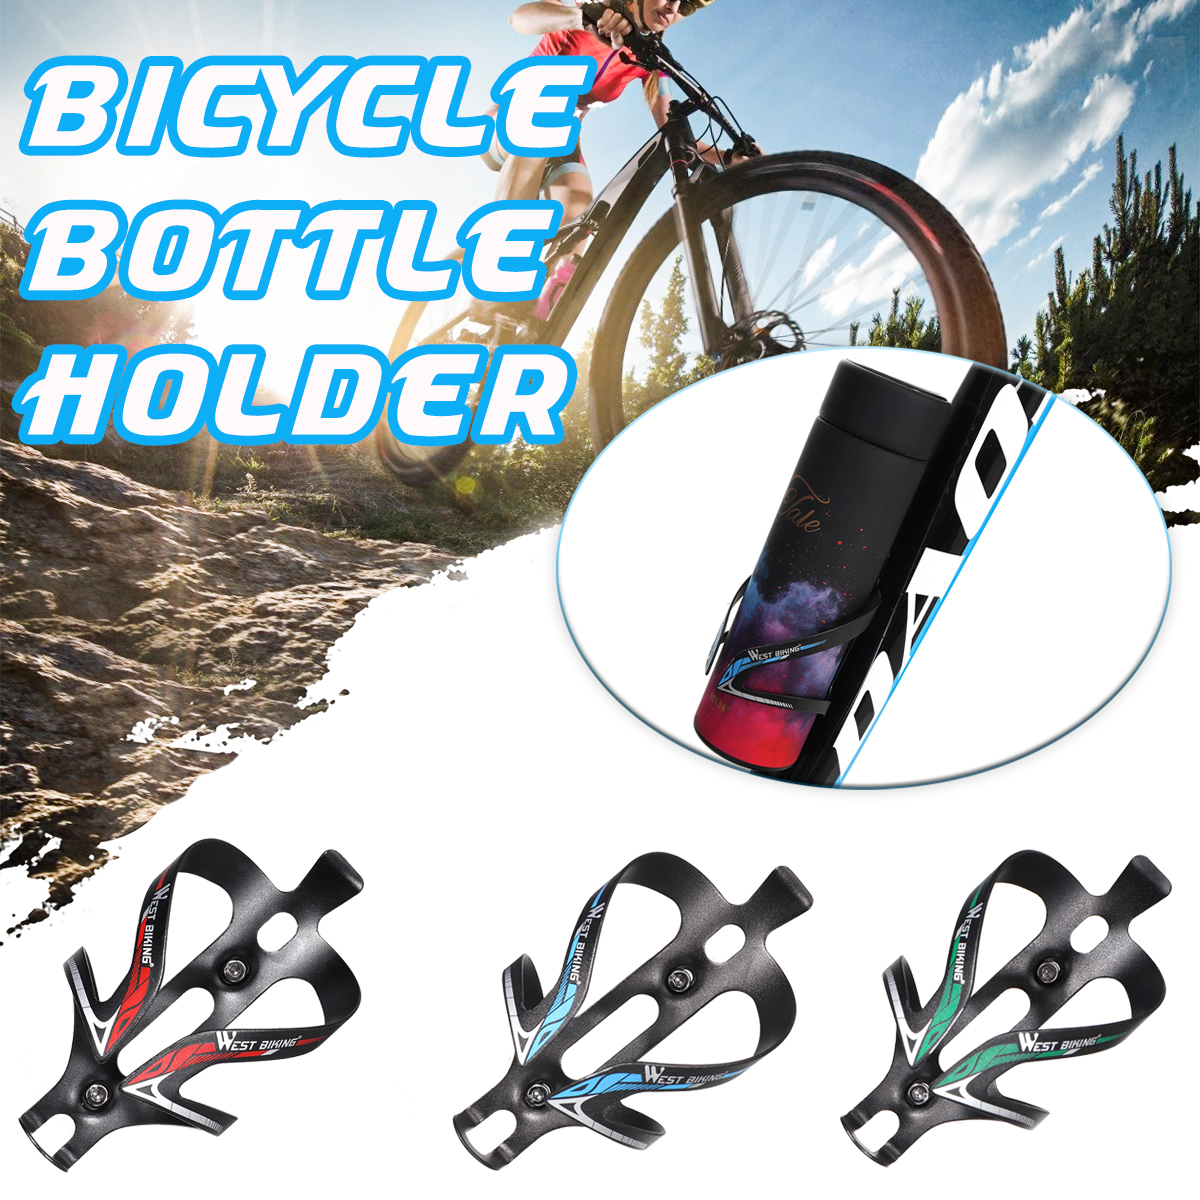 Bicycle-Drink-Water-Bottle-Holder-Cycling-Sports-Bike-Aluminum-Alloy-Rack-Cages-1790721-1